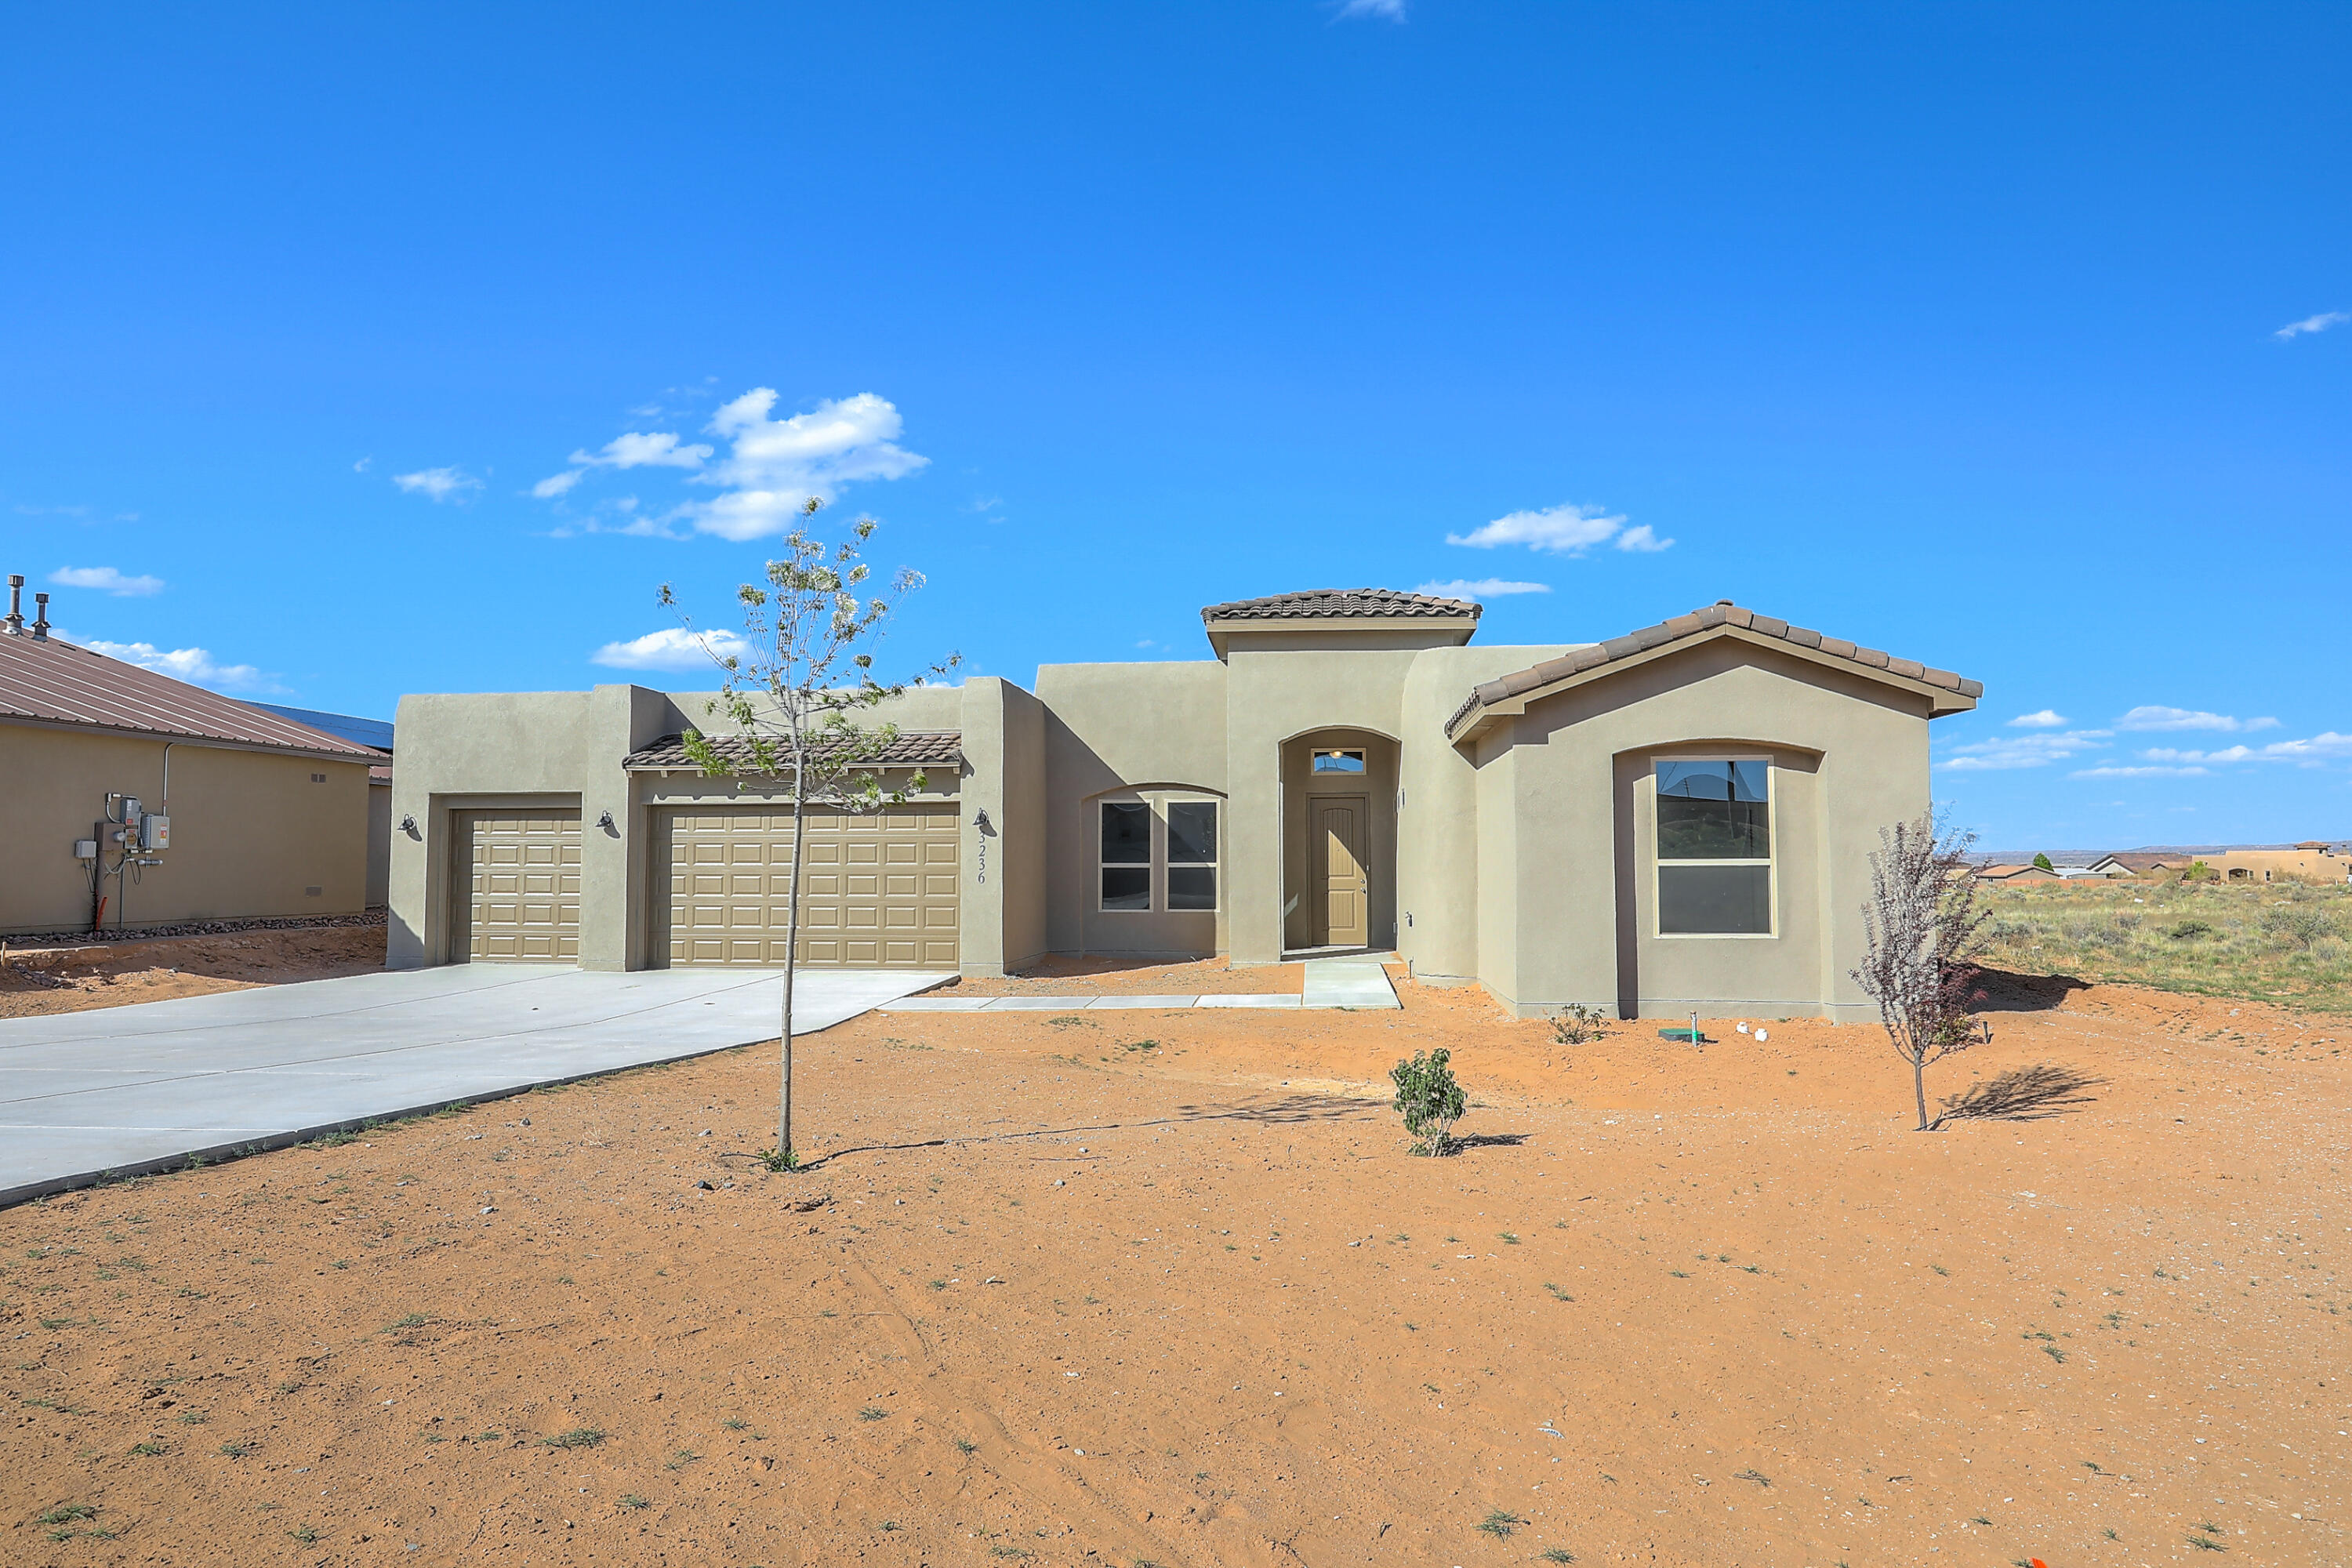 Newly Completed New Construction. This gem sits on a half acre with paved roads, all city utilities, and a view of the Sandias from your back patio. The home features a separate wing for bedrooms 2 and 3, while the master enjoys views out the back.